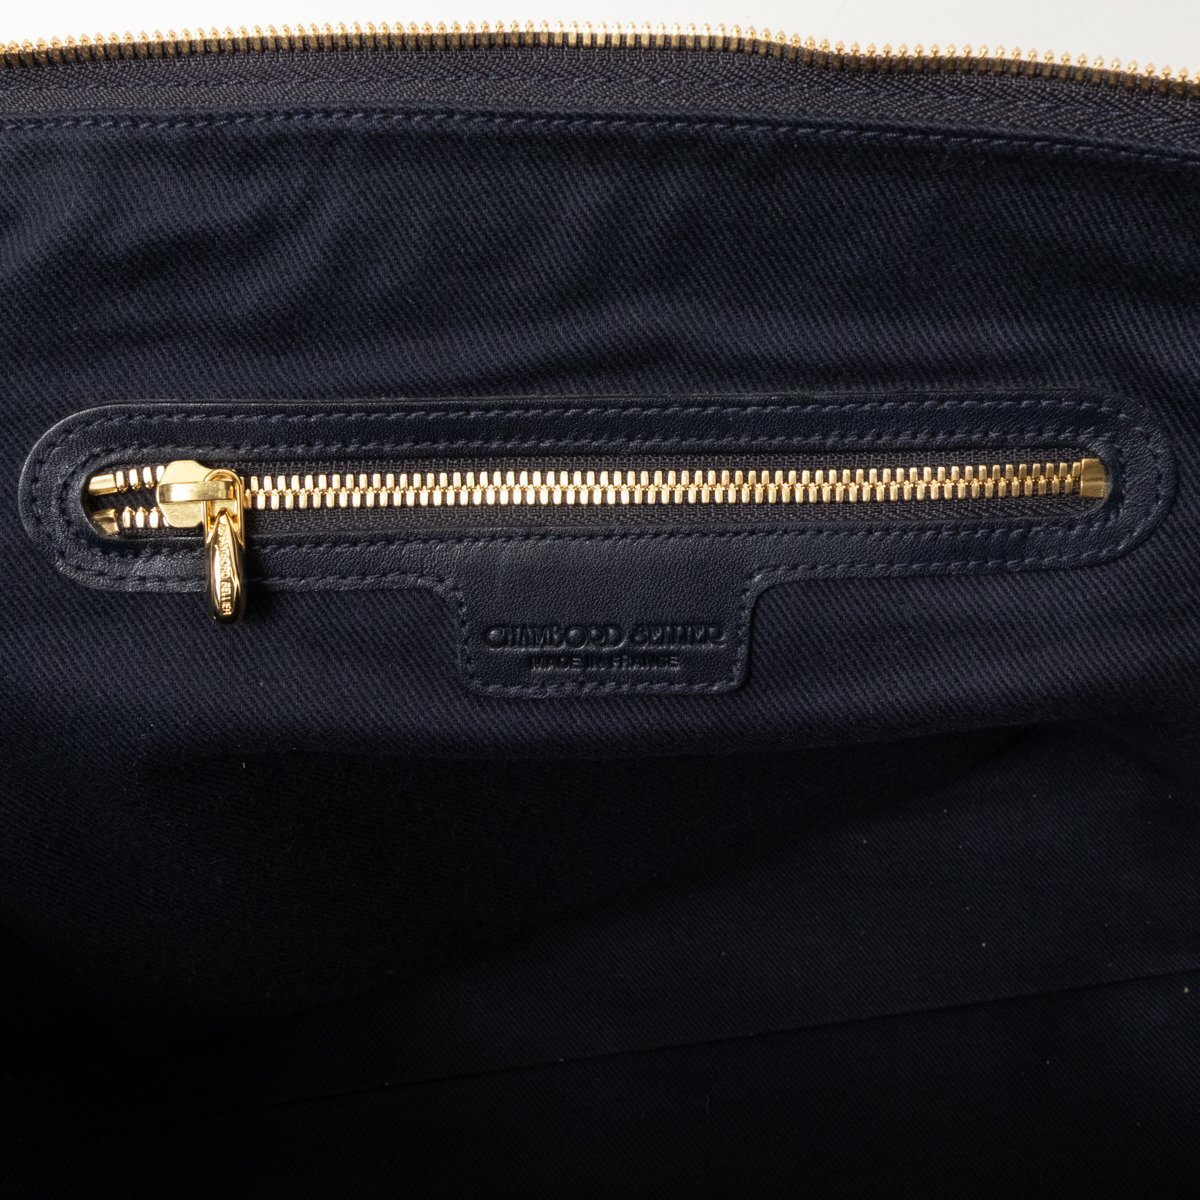 [1 jpy start ]CHAMBORD SELLIER car n ball Serie France made briefcase business bag navy leather A4 size storage possible bag 